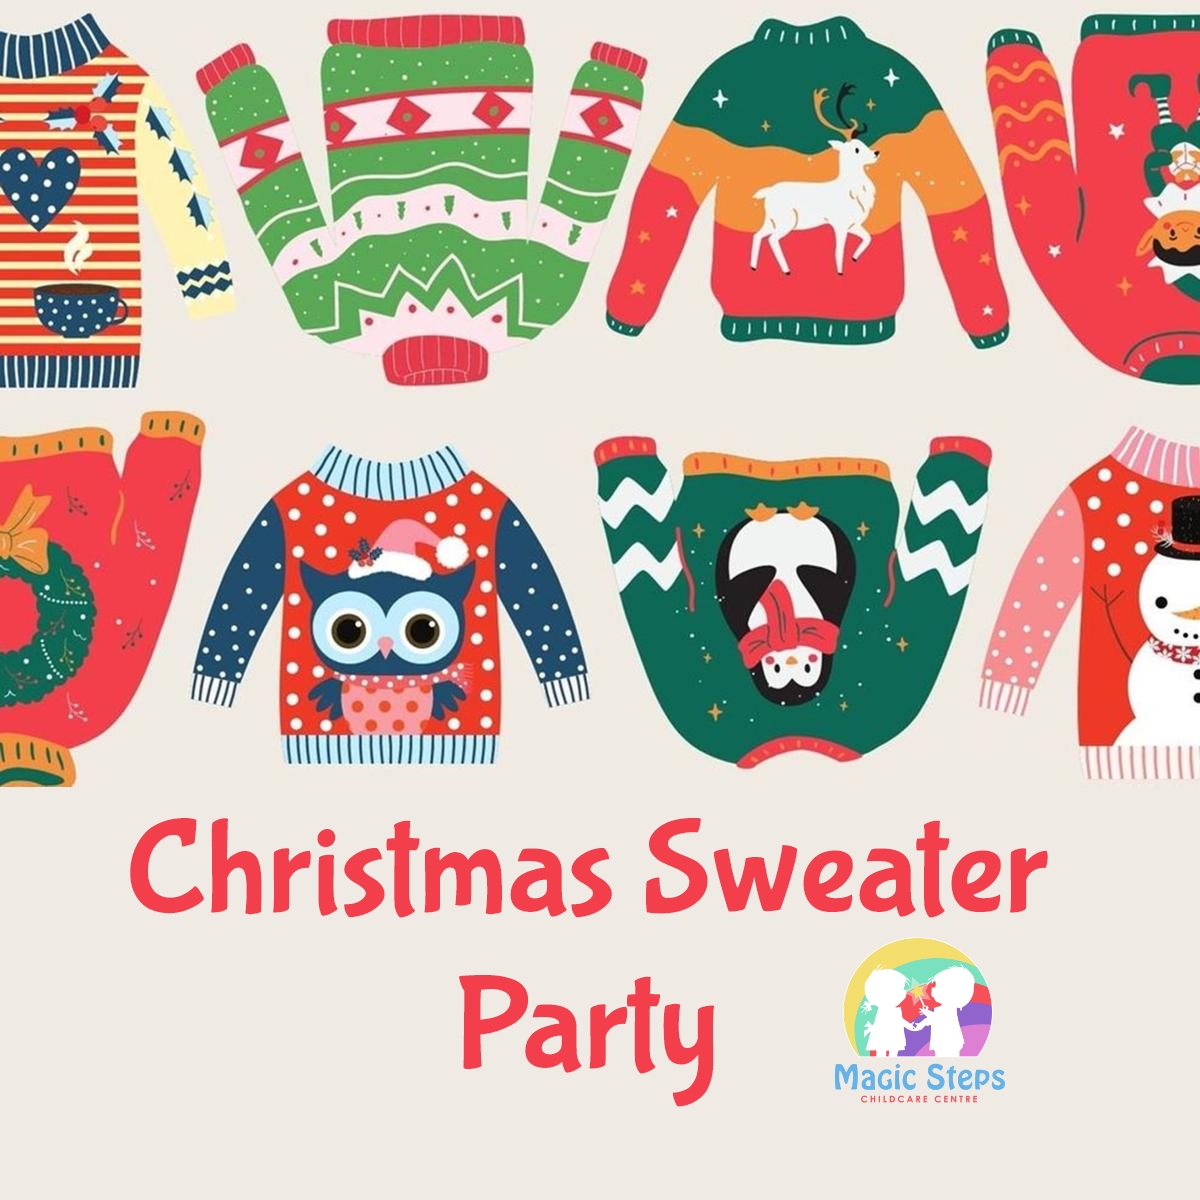 Christmas Sweater Party- Tuesday 21st December